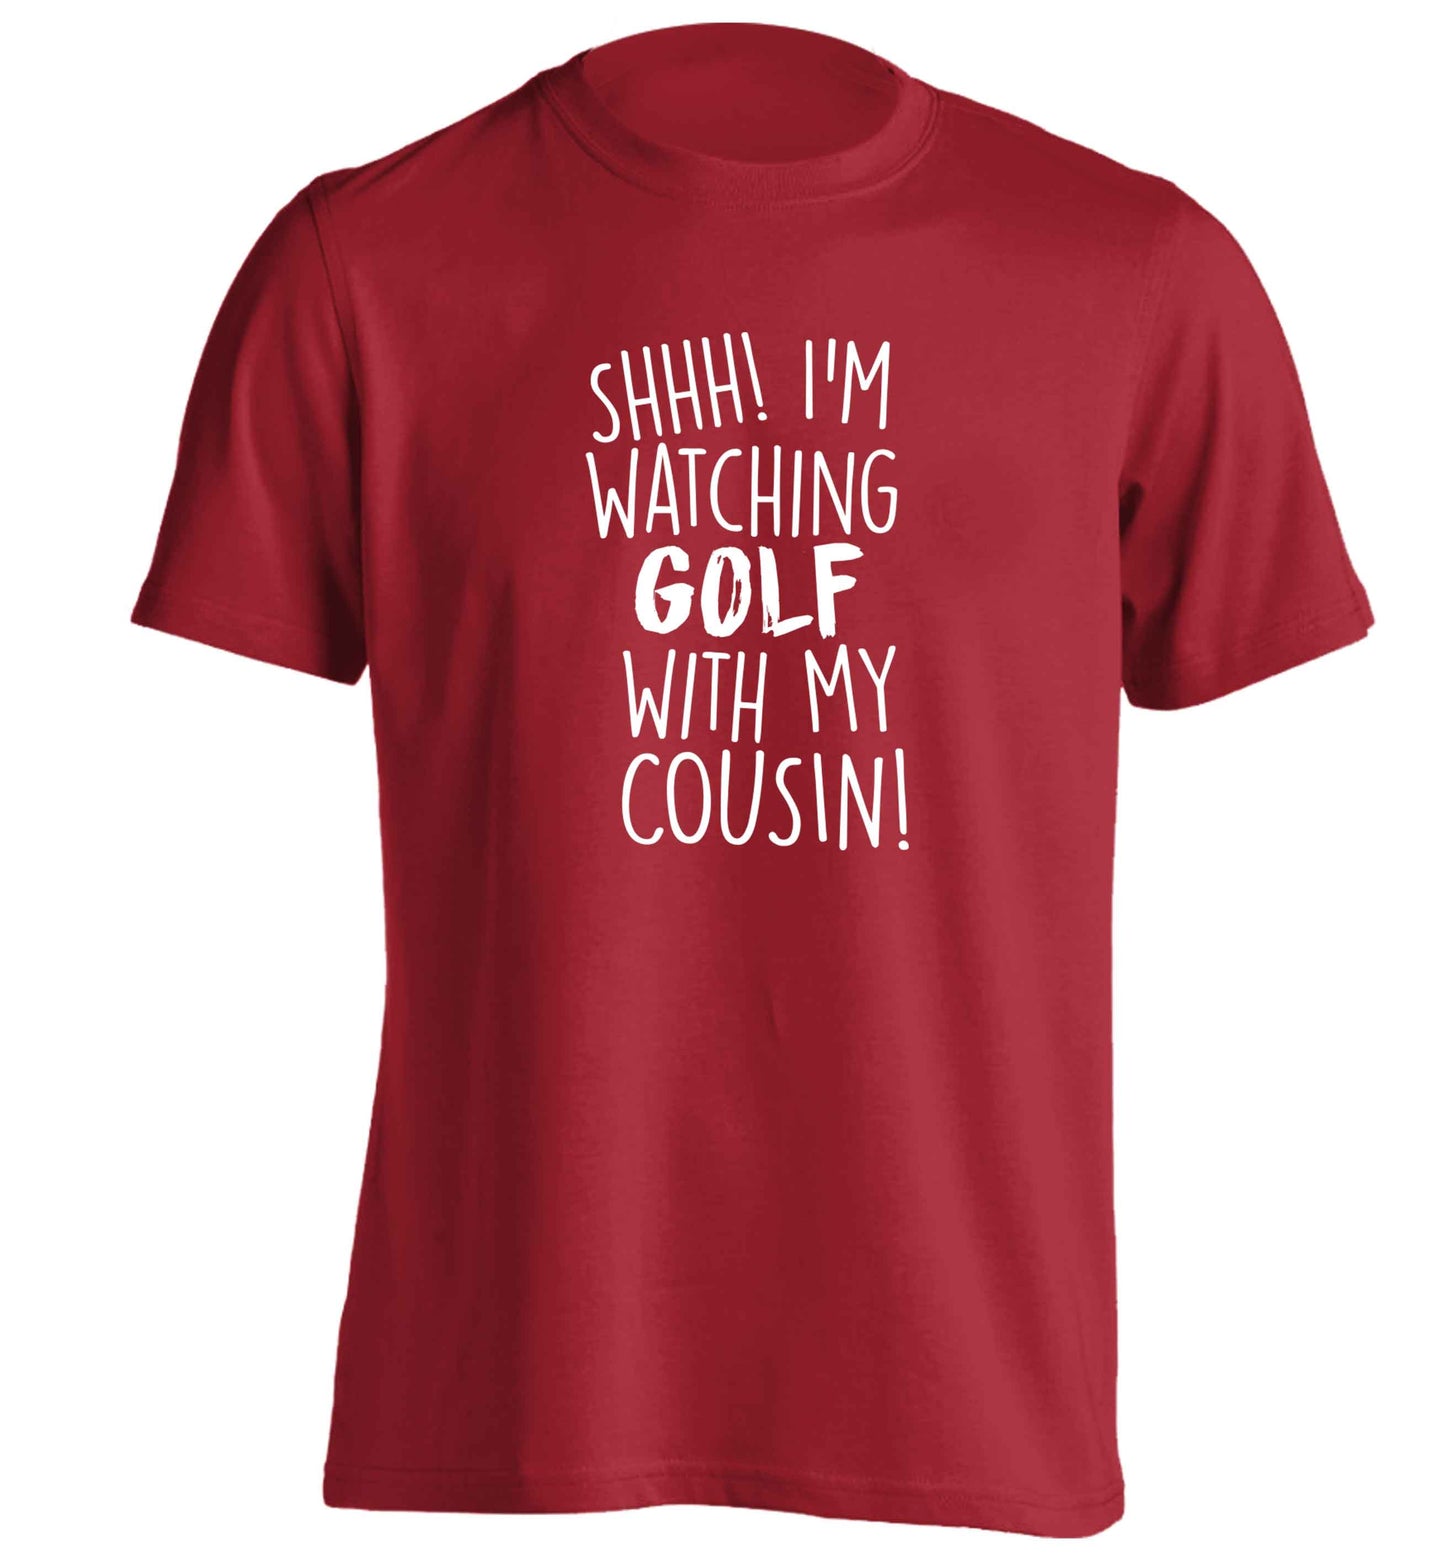 Shh I'm watching golf with my cousin adults unisex red Tshirt 2XL